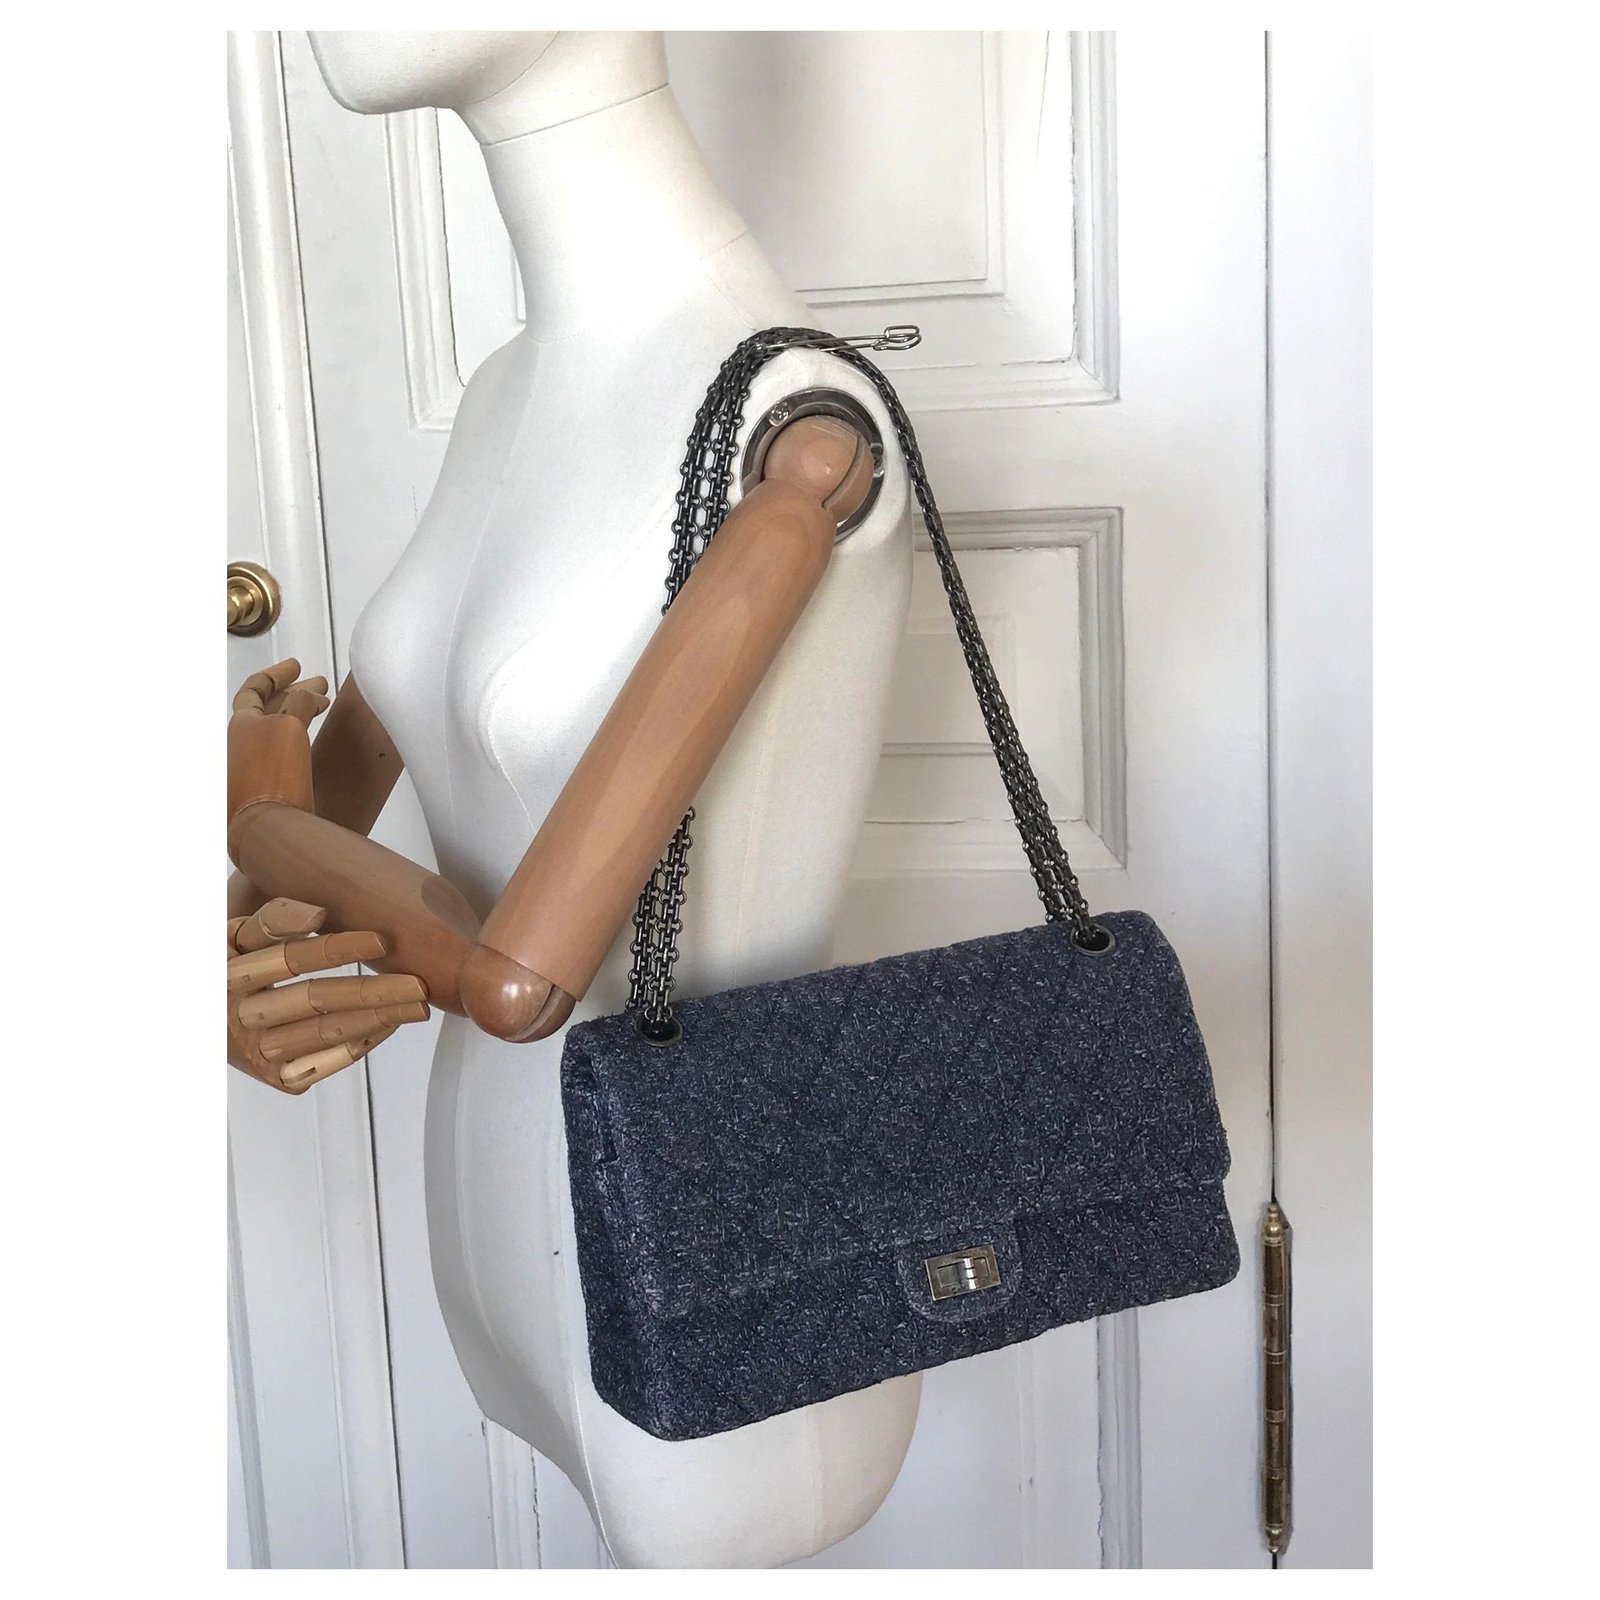 Chanel princess Diana flap bag two tone lambskin leather gold hardware  measures 10 x 6.5 x 2.5  20 chain drop asking $13…